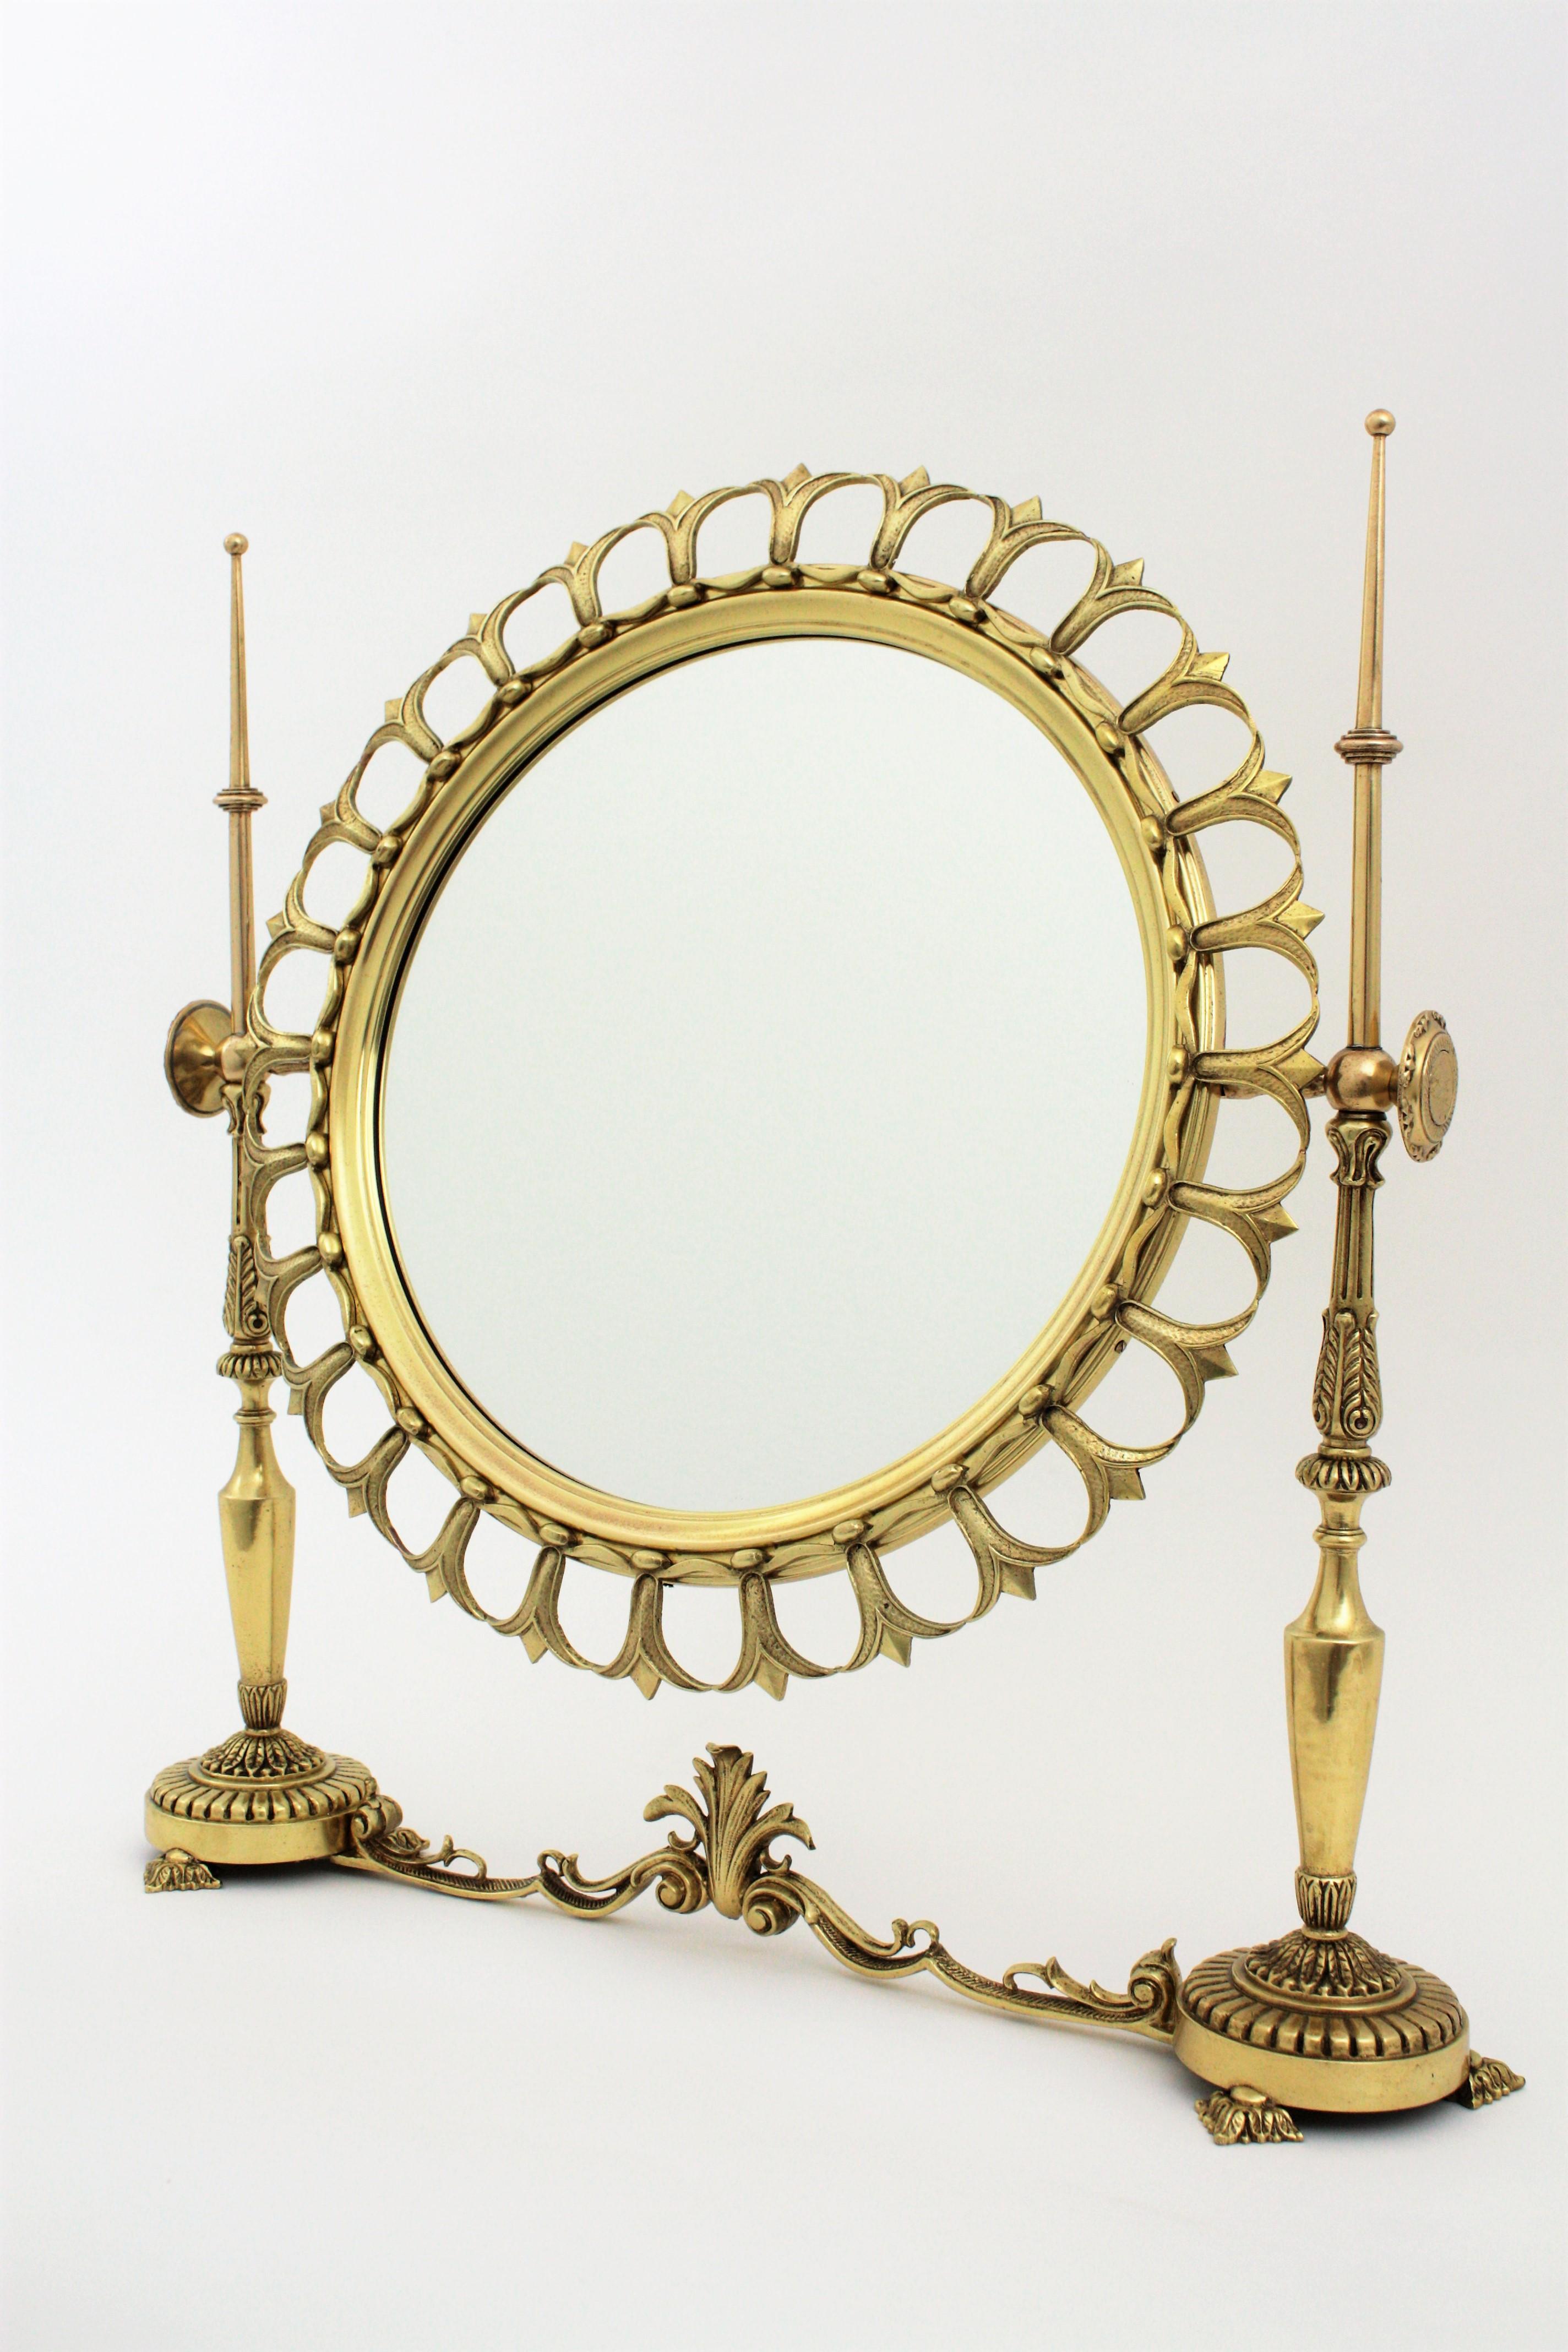 Neoclassical Sunburst Vanity or Table Mirror in Brass For Sale 2